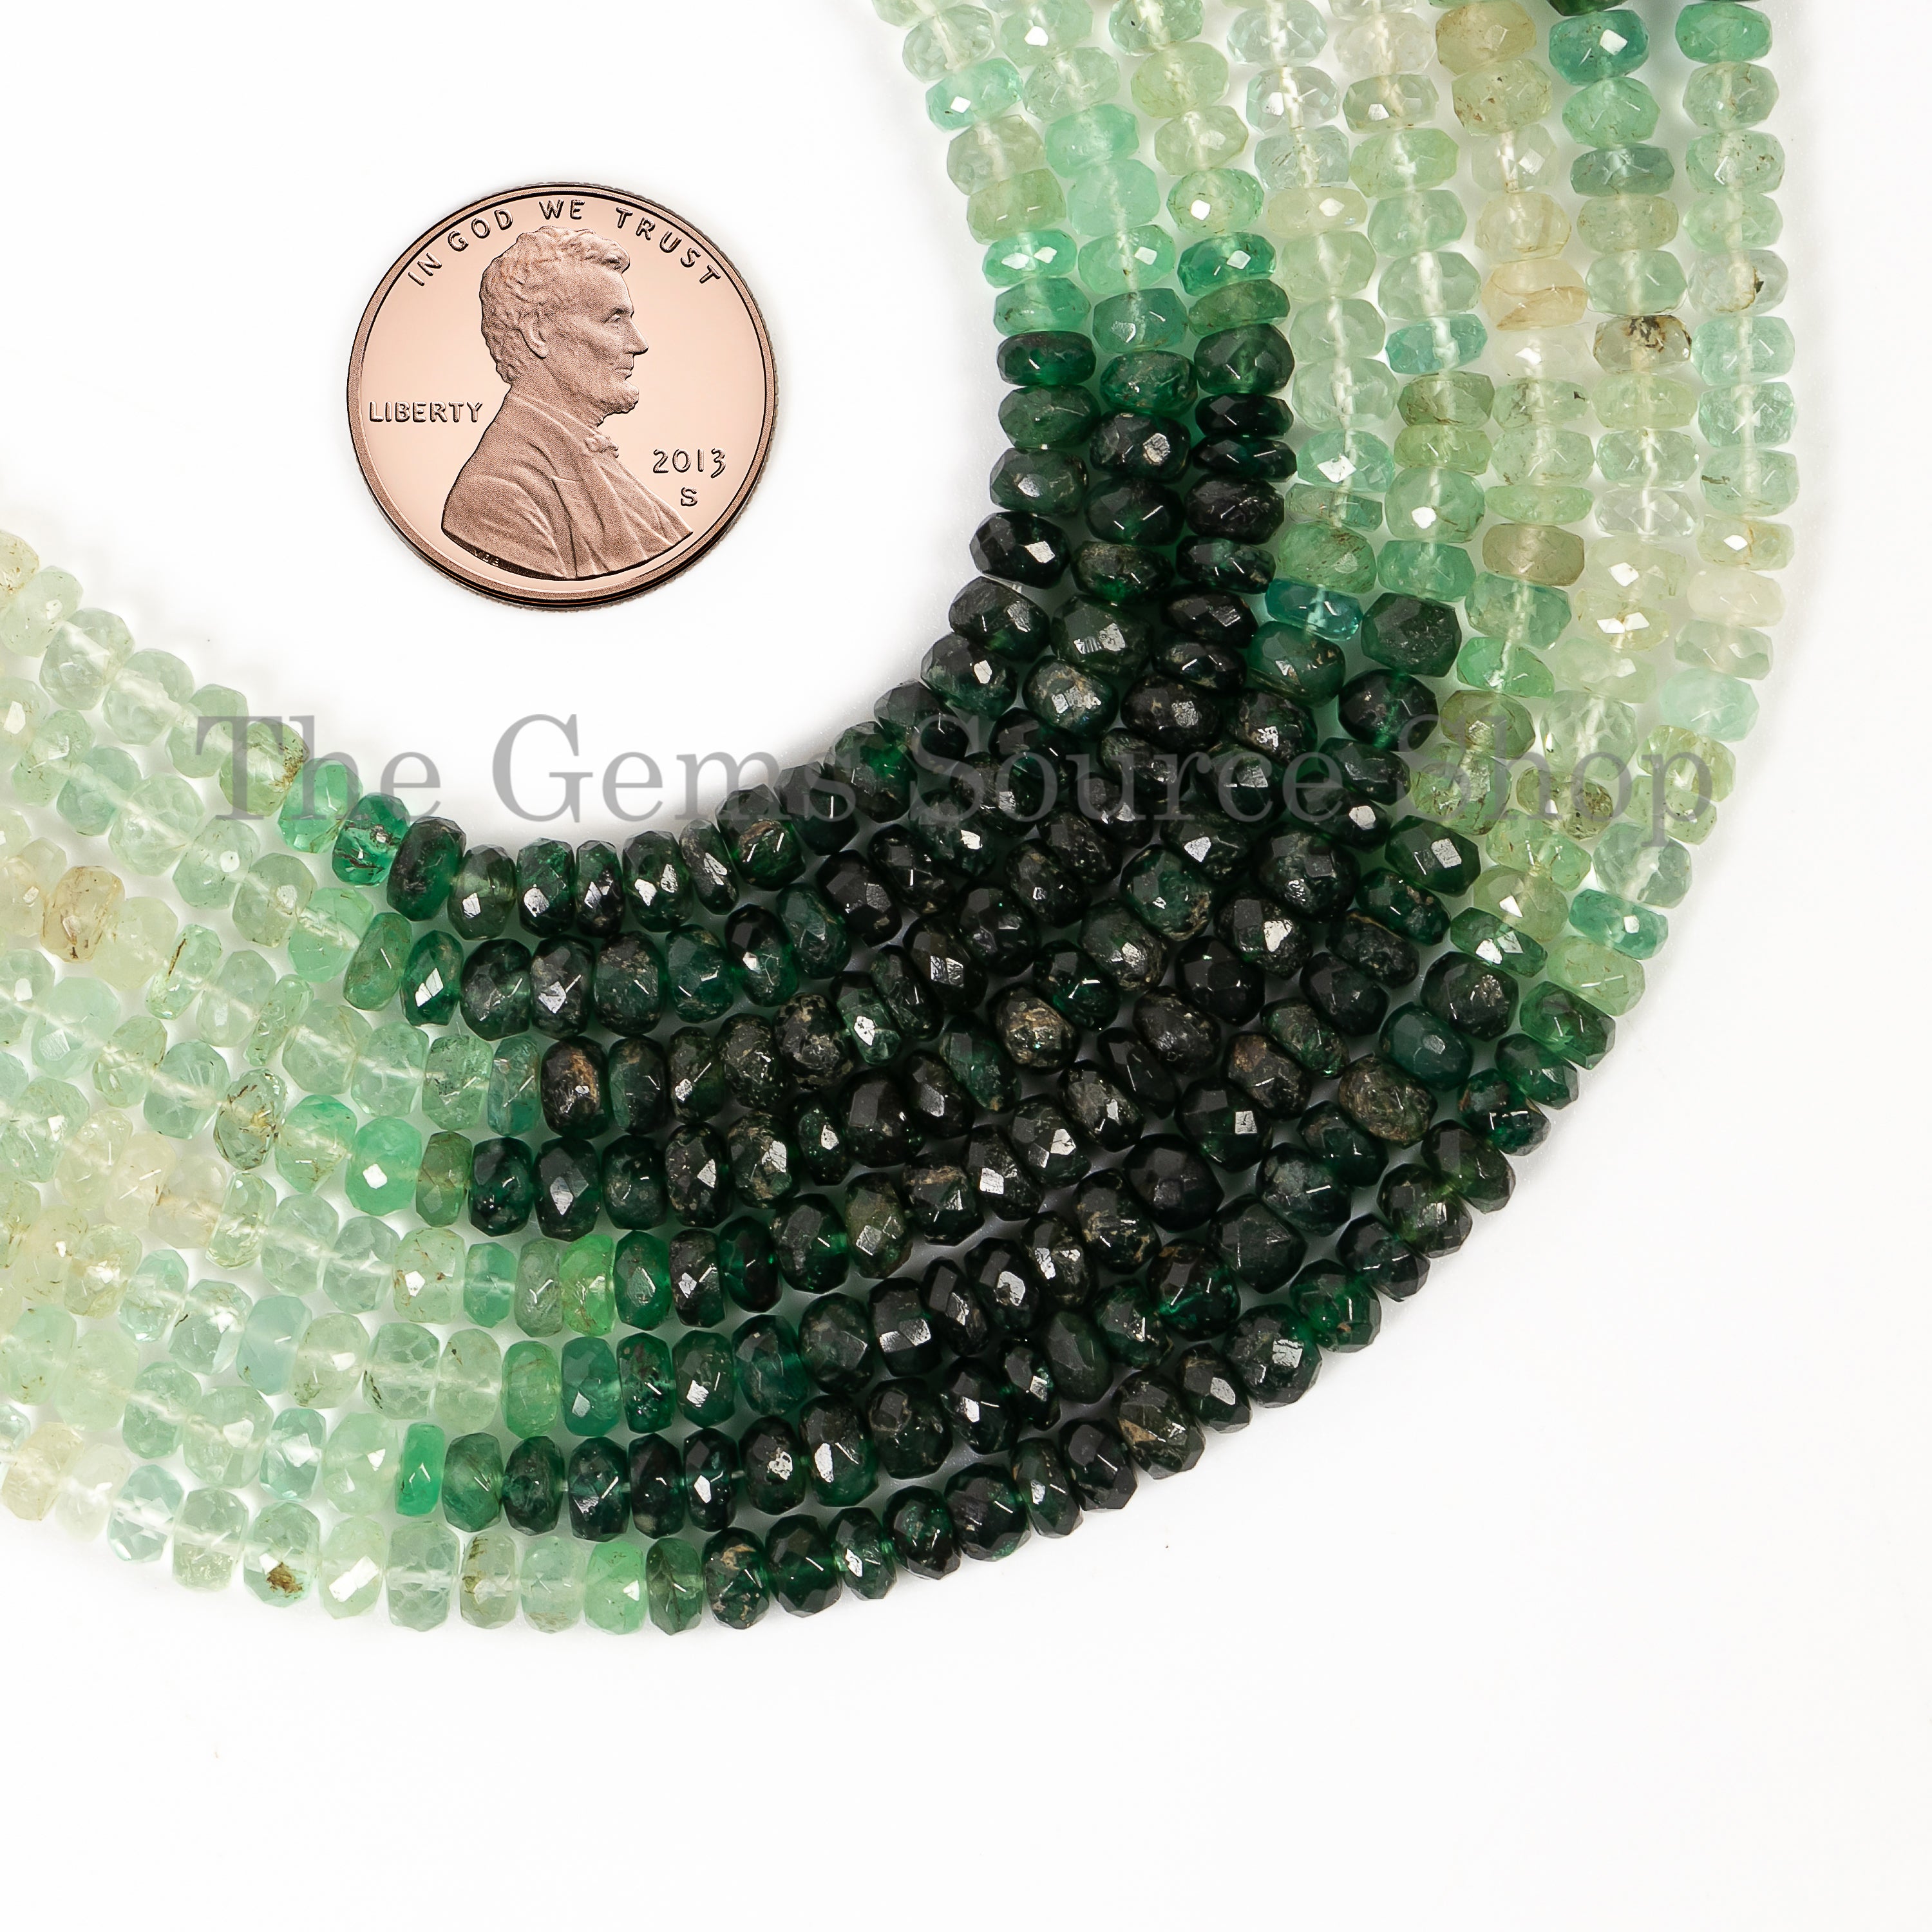 4-4.5 mm Shaded Emerald Faceted Rondelle Briolette Beads TGS-4735